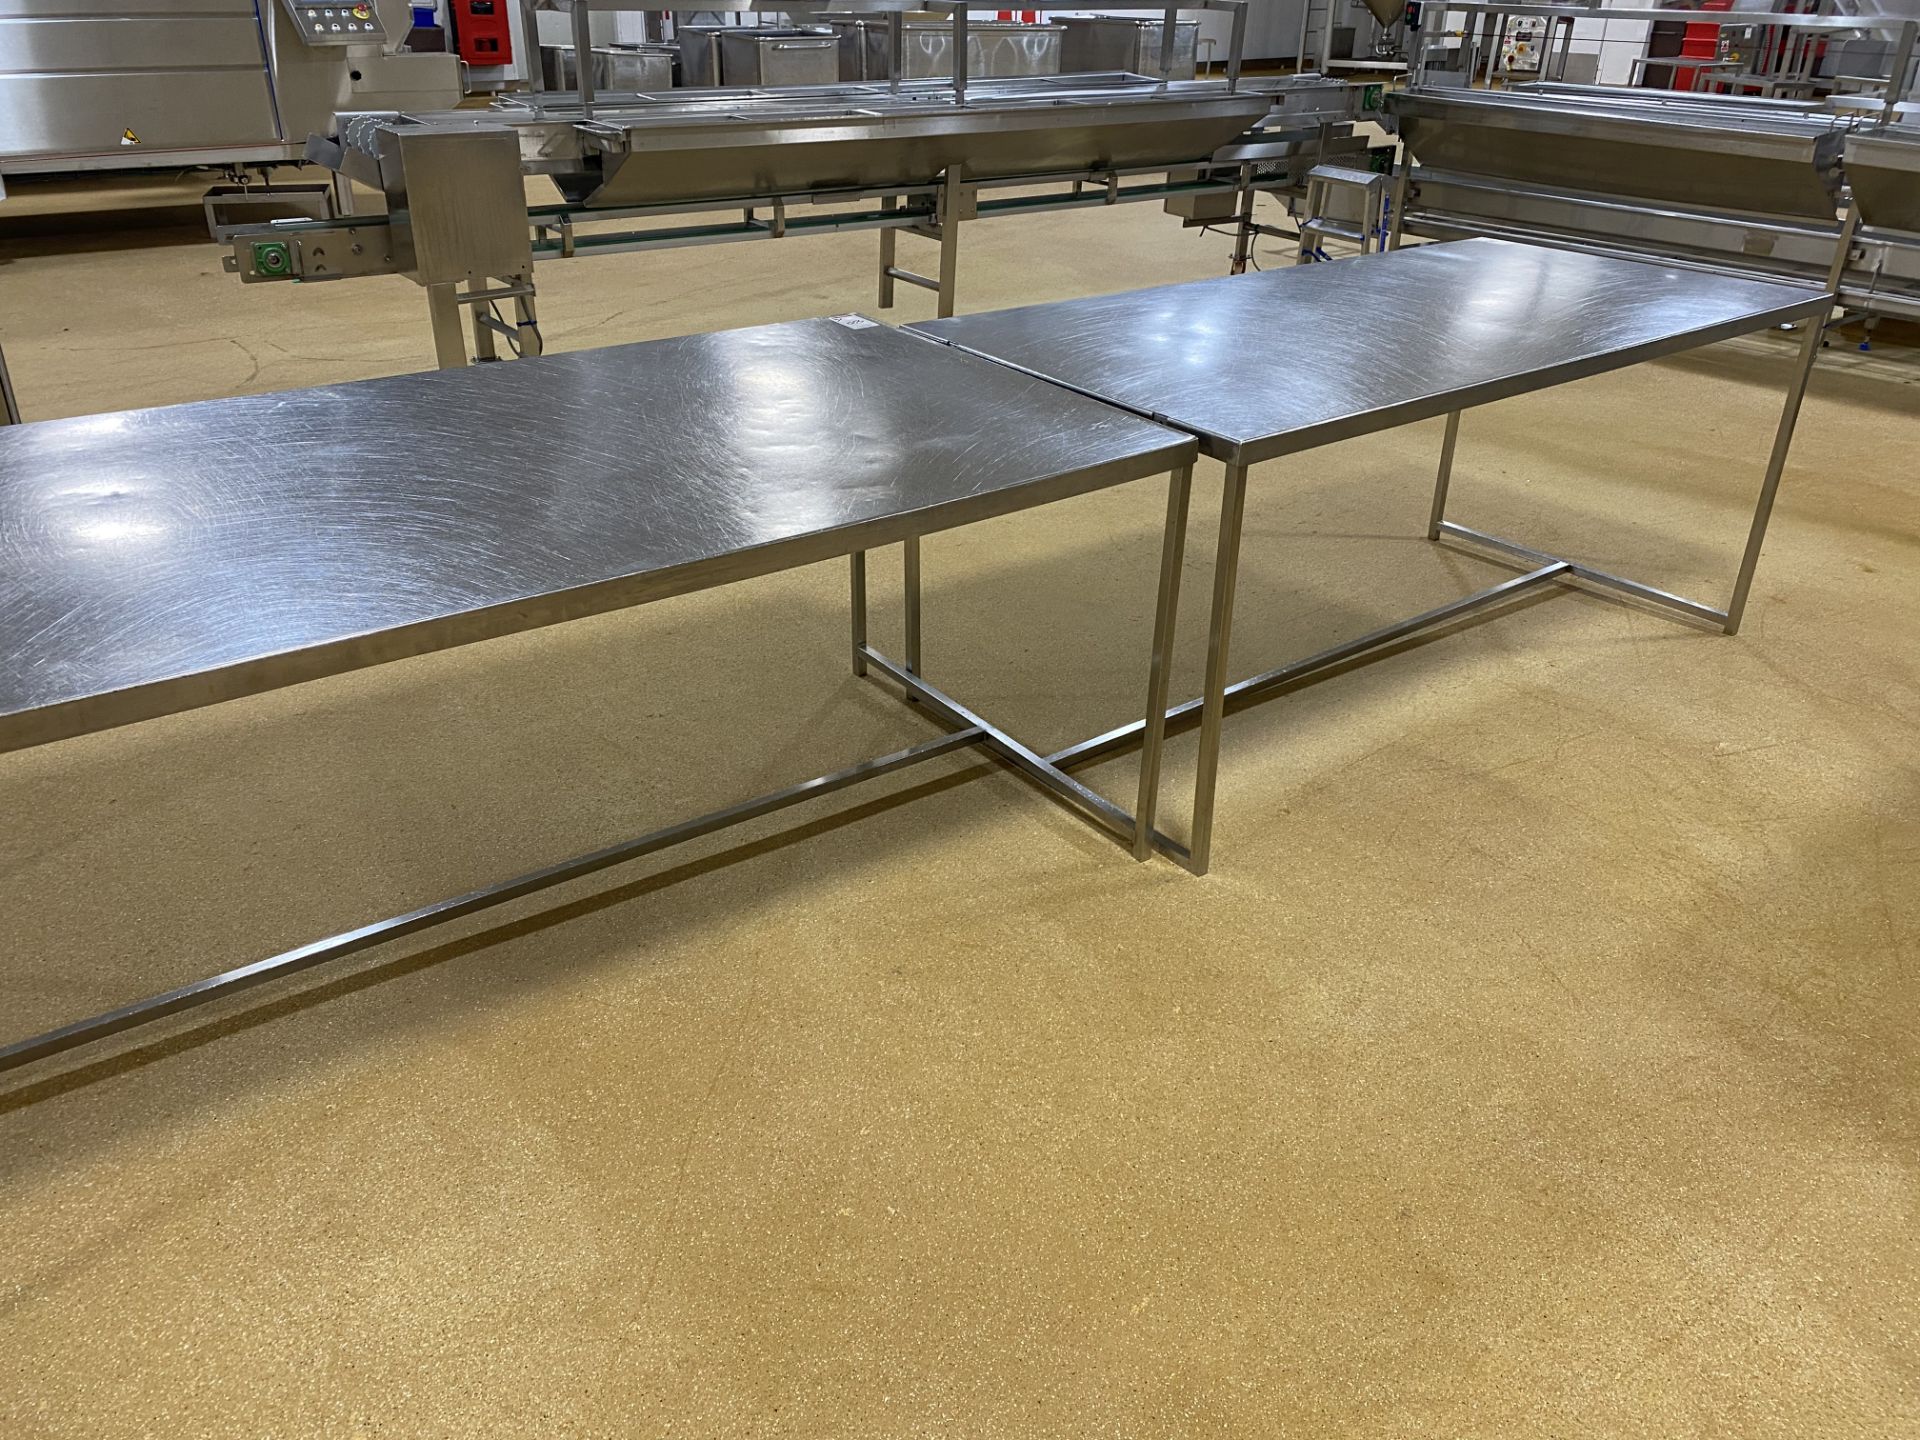 2 Stainless steel preparation tables, Length 193cm